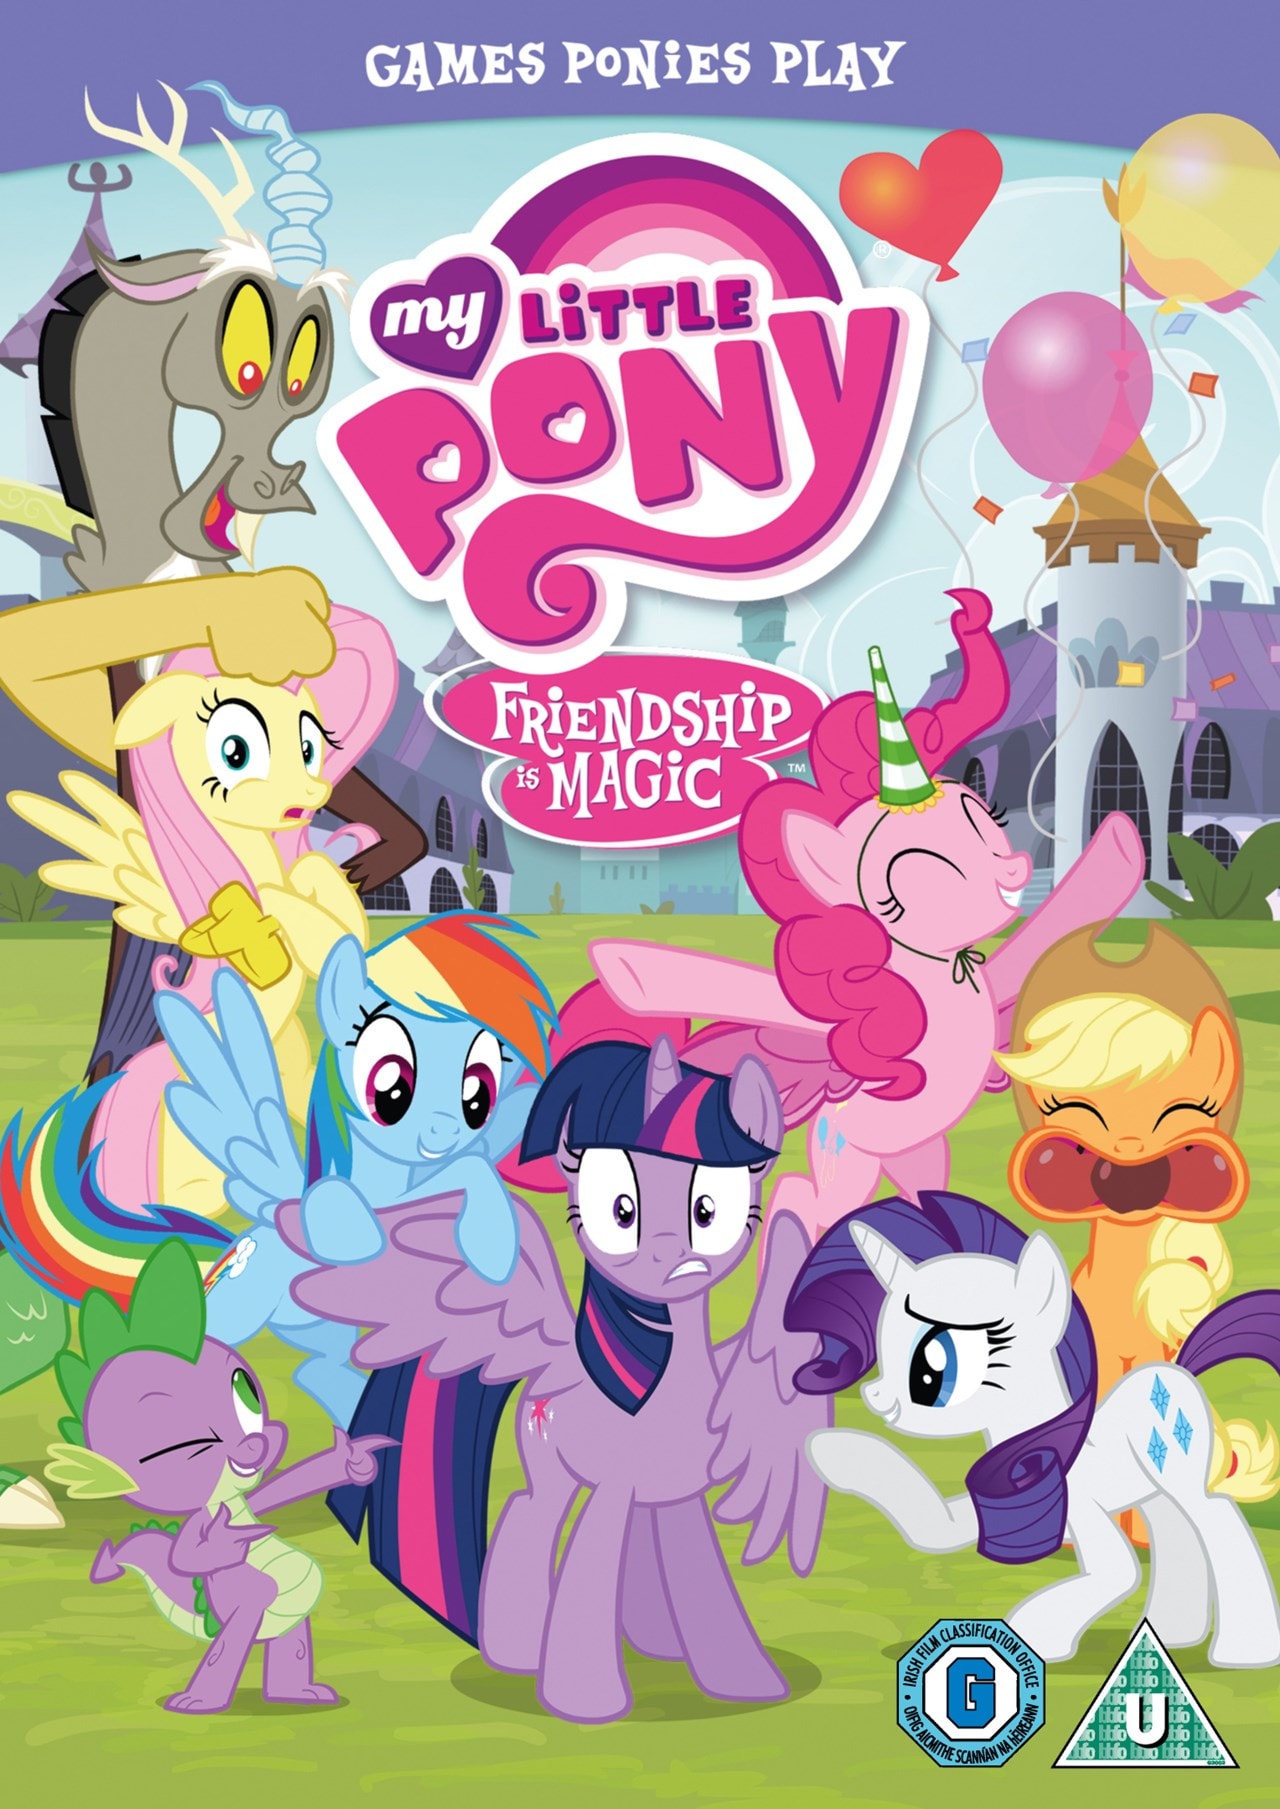 my little pony play games